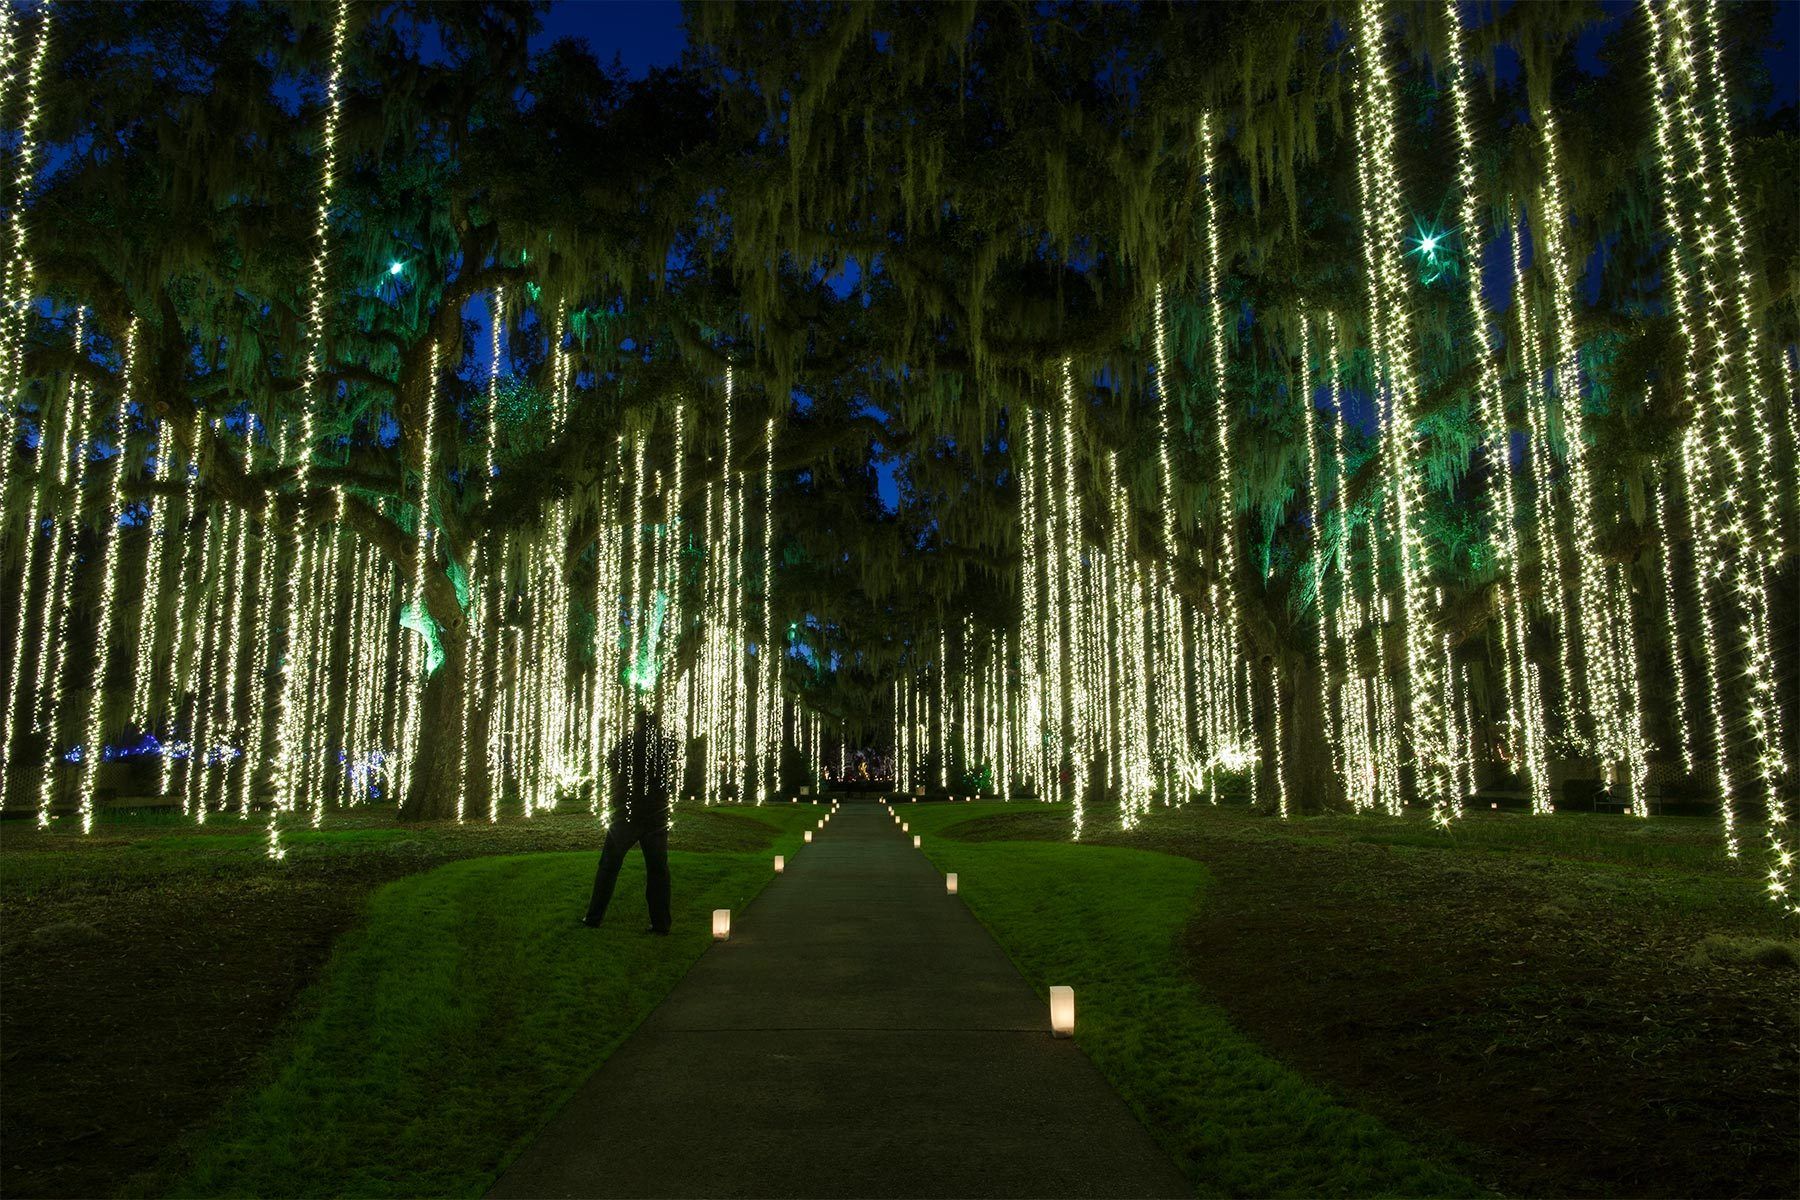 Light curtains hang from the 250 year-old trees at Live Oak Allee during the annual Nights of a Thousand Candles at Brookgreen Gardens in Murrells Inlet.